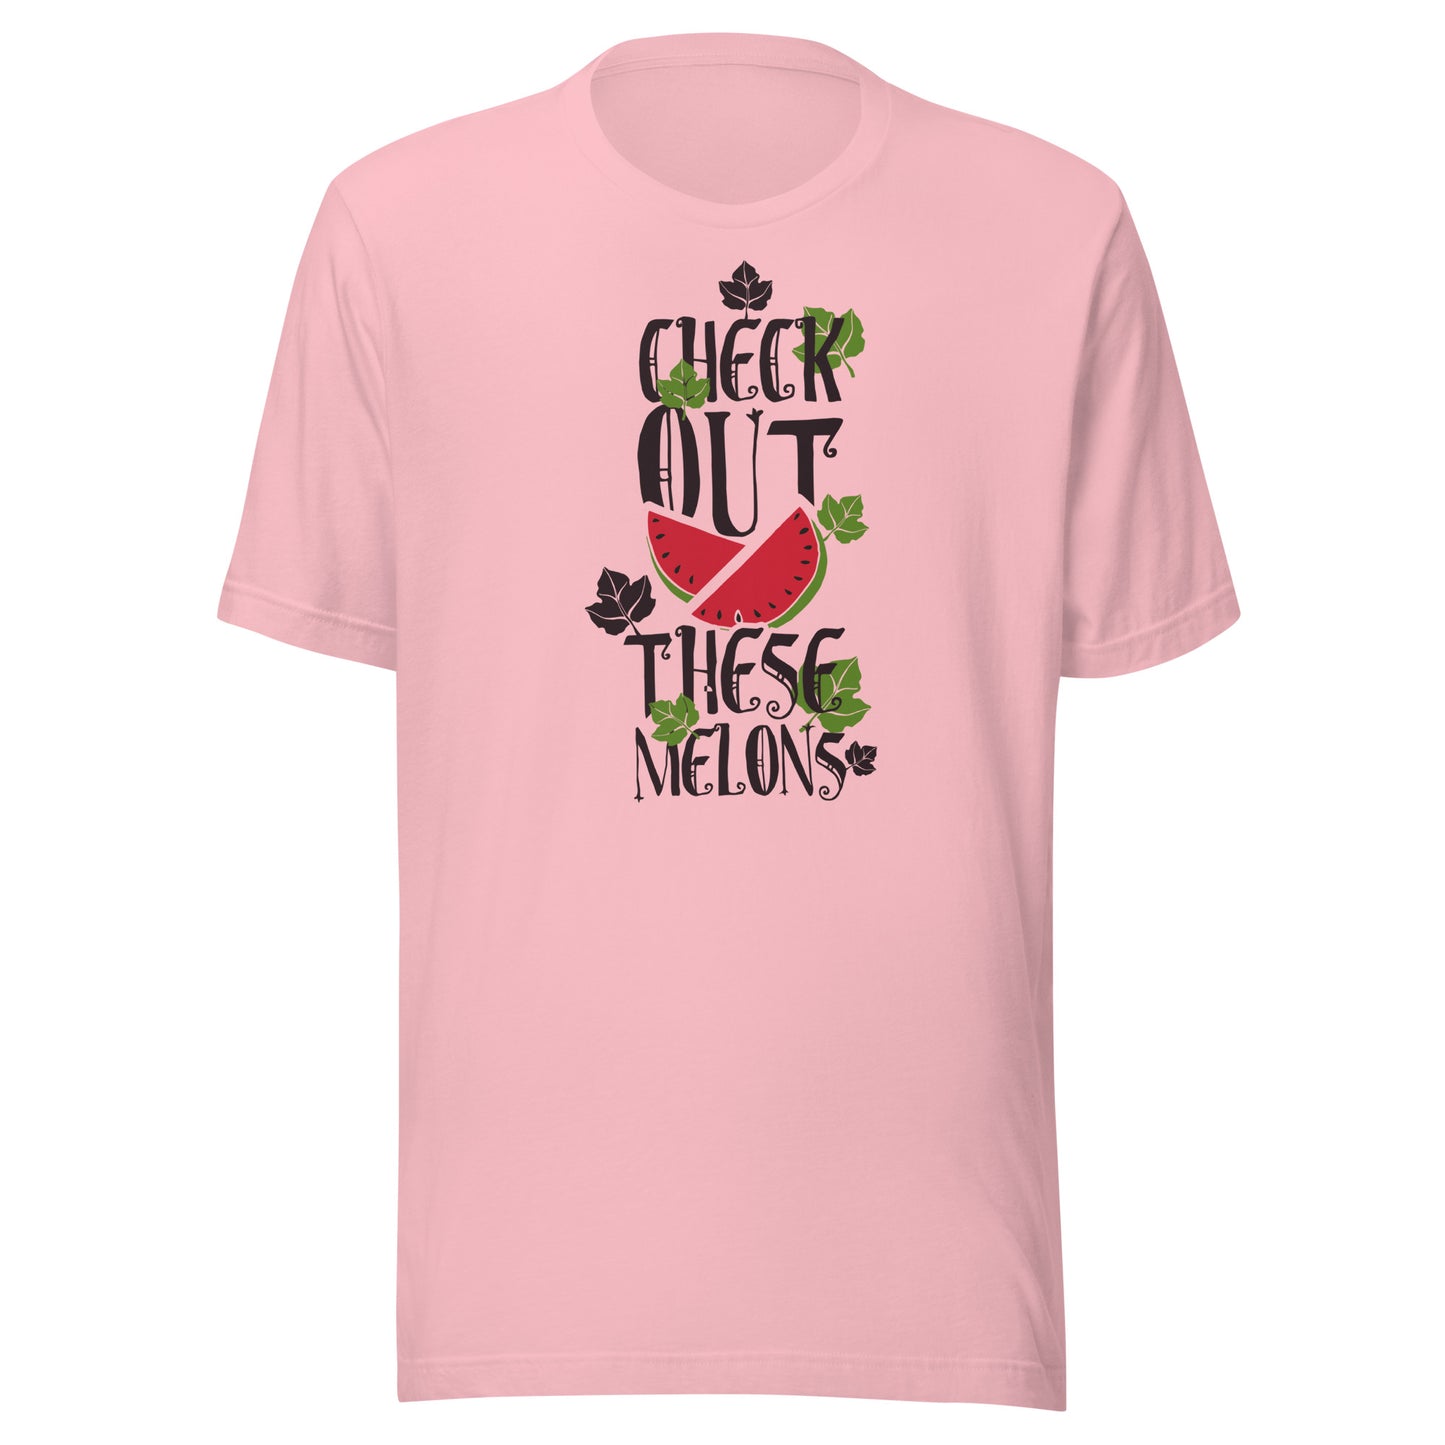 Check Out These Melon T-Shirts!